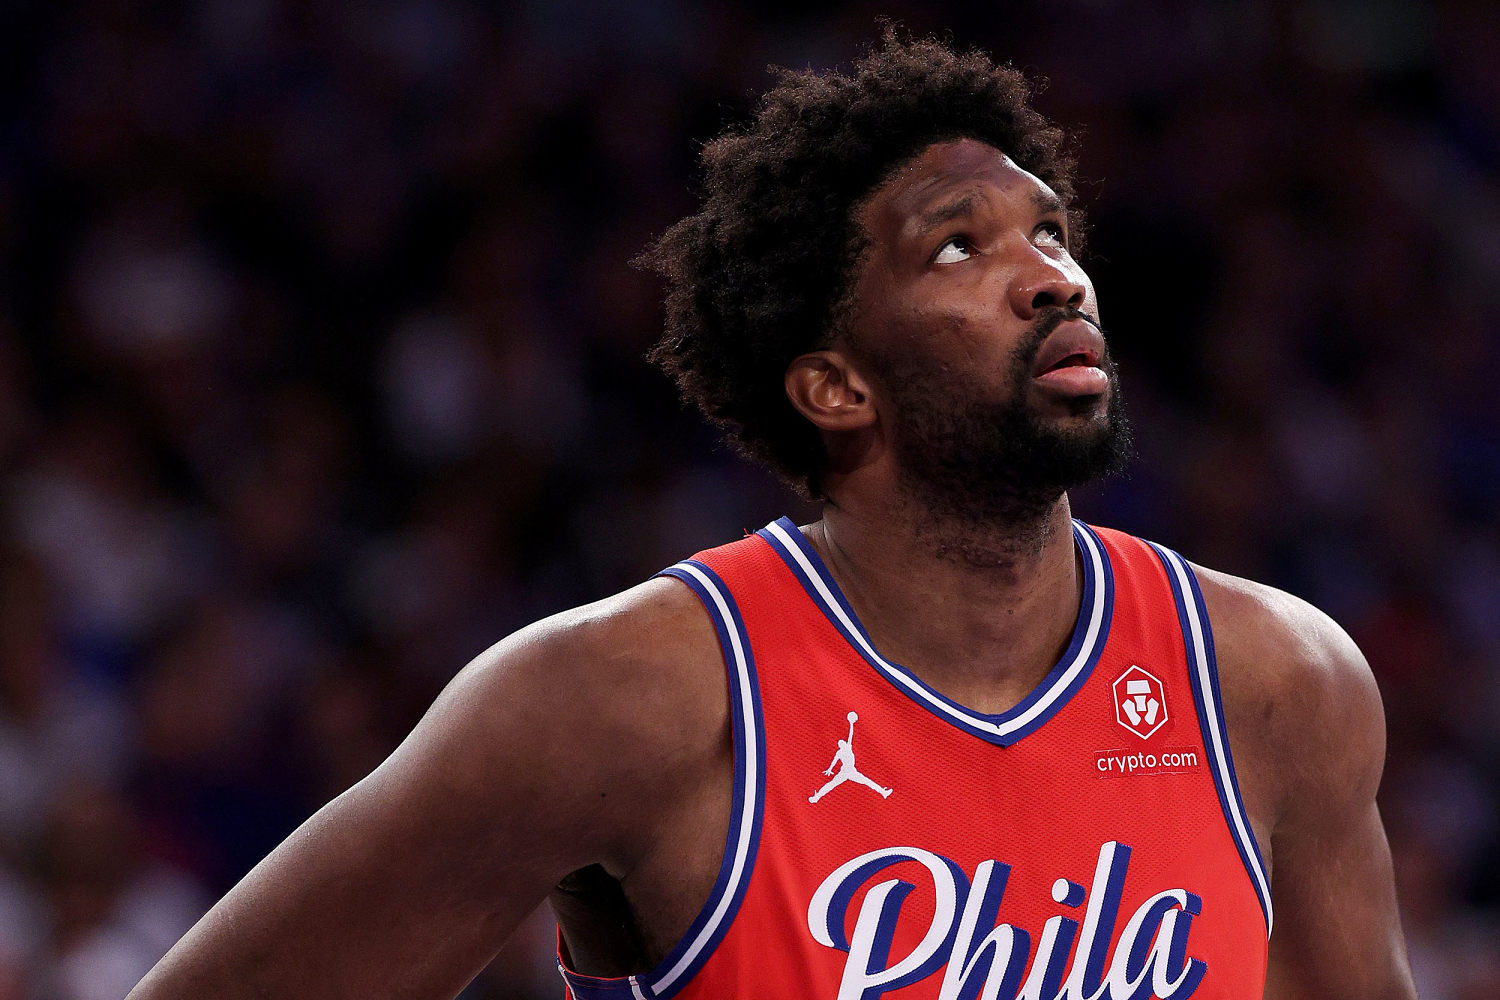 76ers All-Star Joel Embiid says he was diagnosed with Bell's palsy before the playoffs started